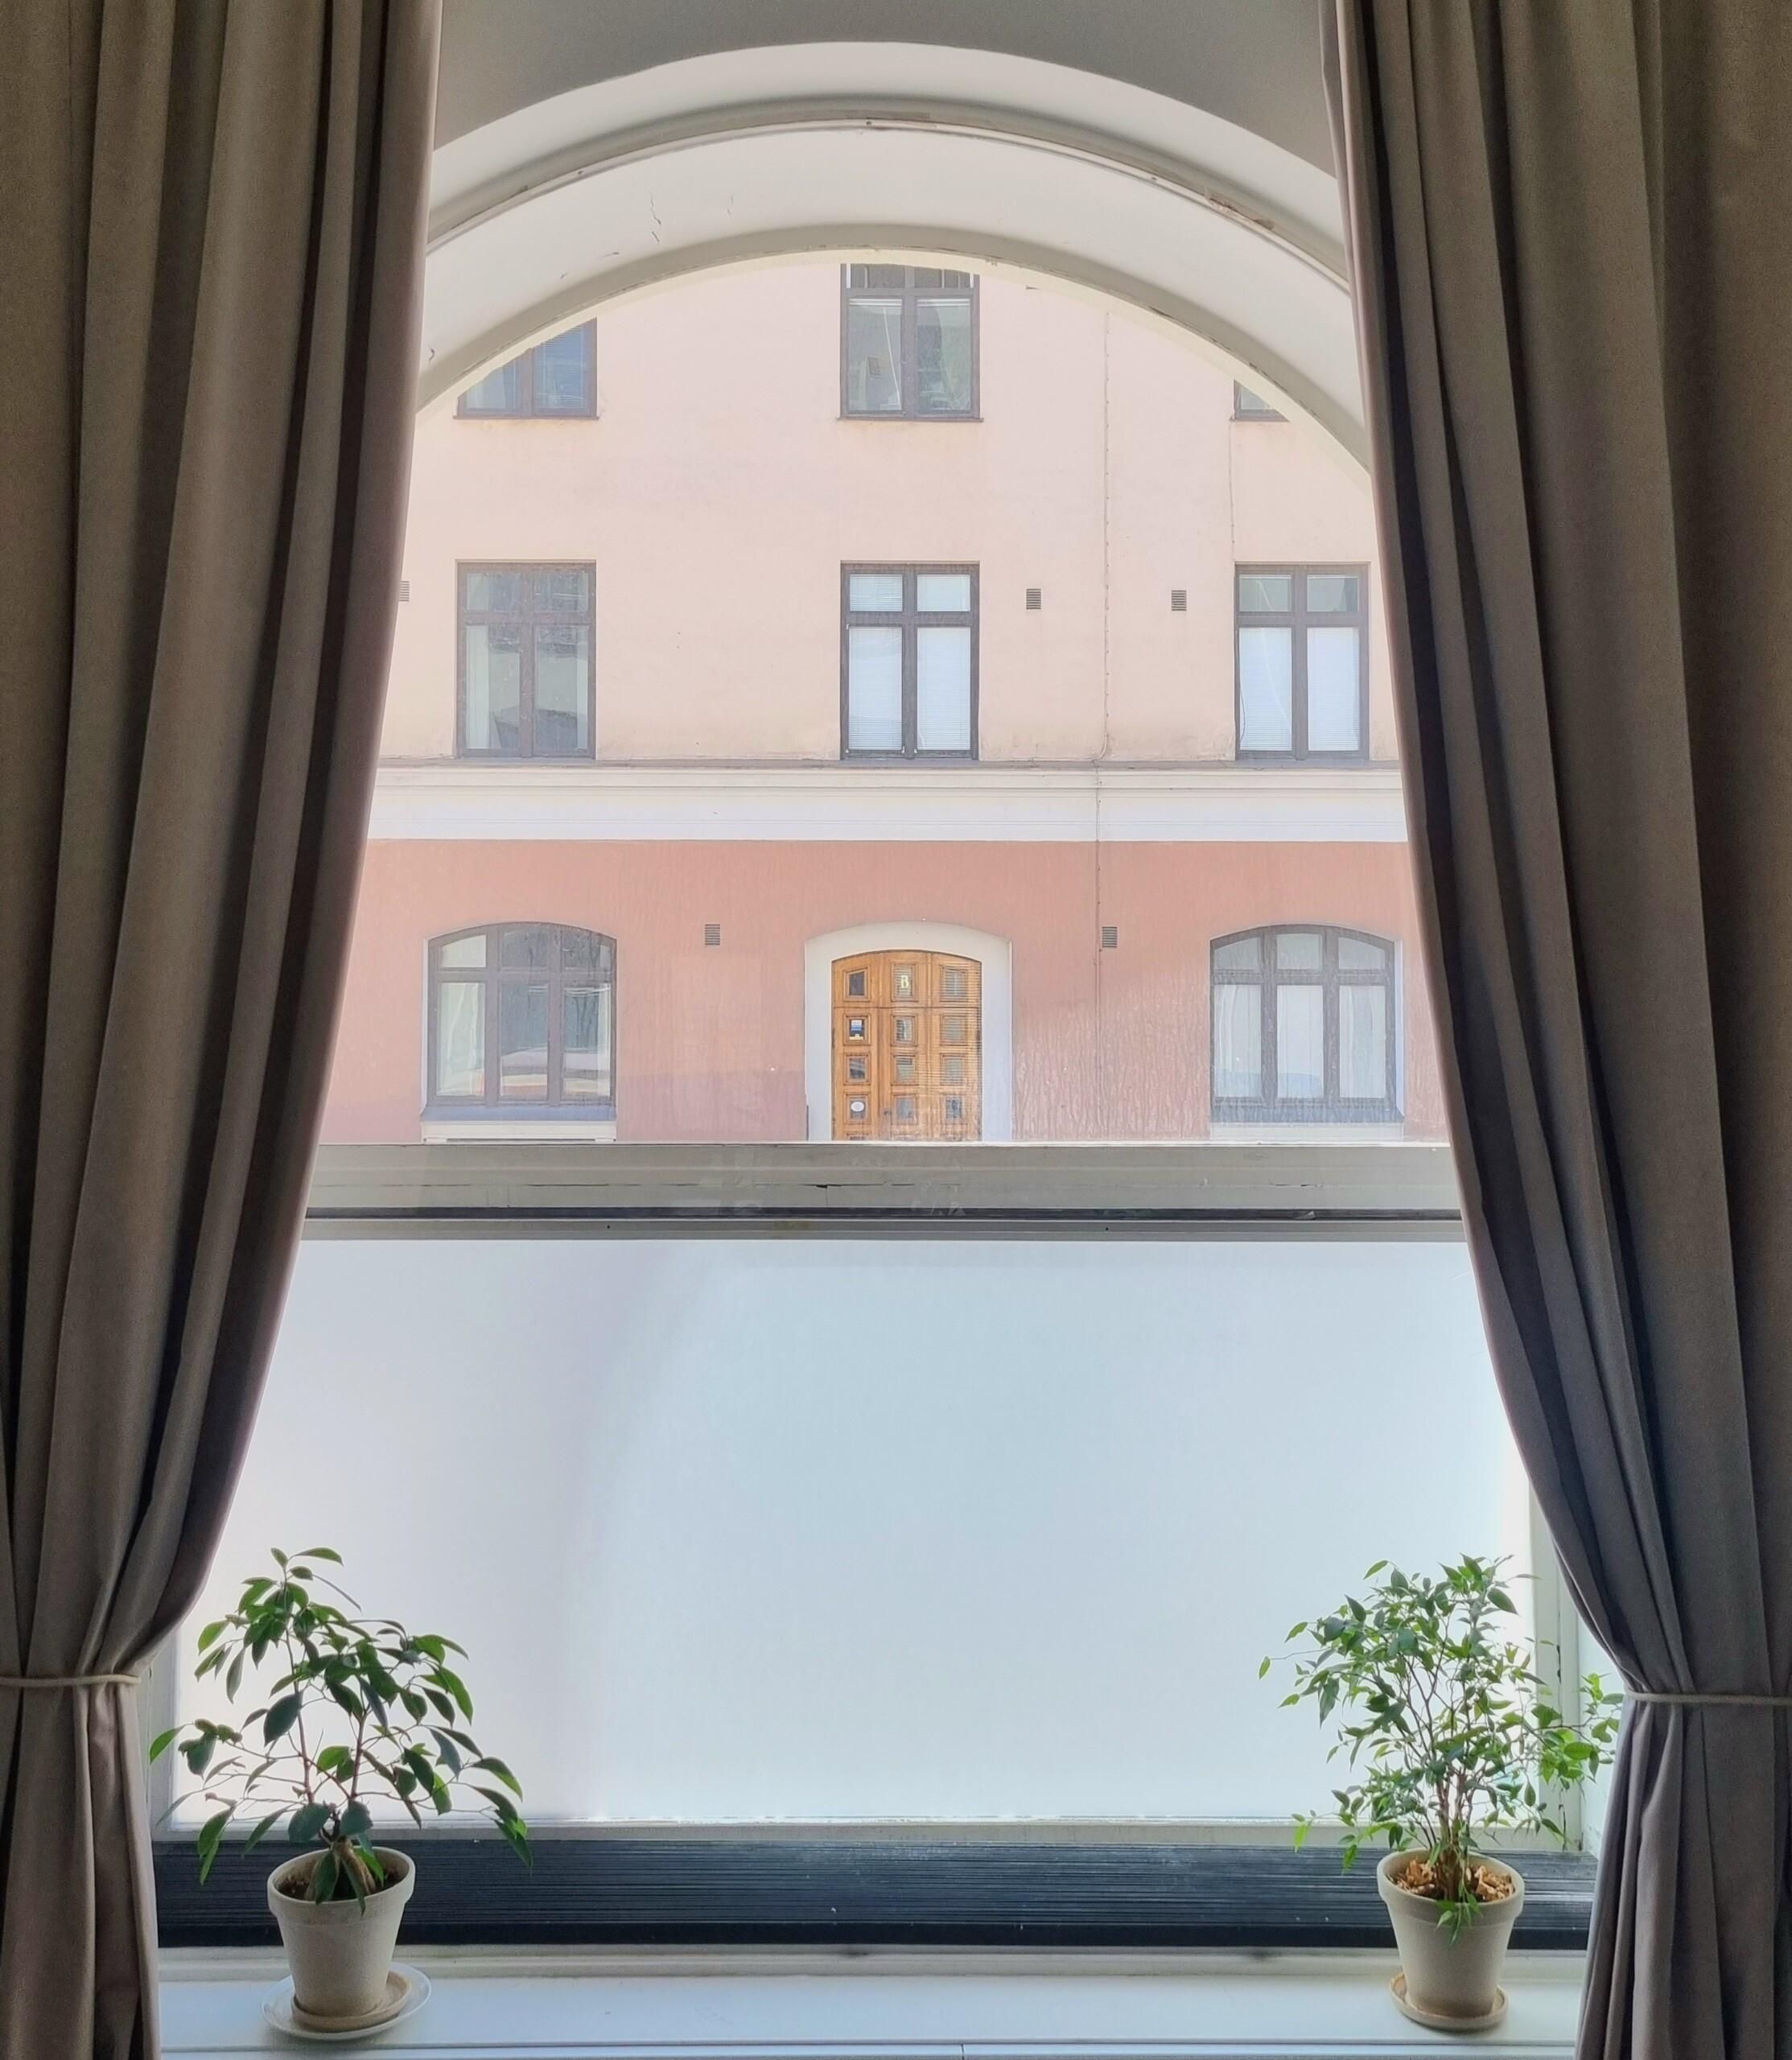 A curved, large window showing a street outside. There are two beige curtains framing the window and two houseplants on the windowsill.